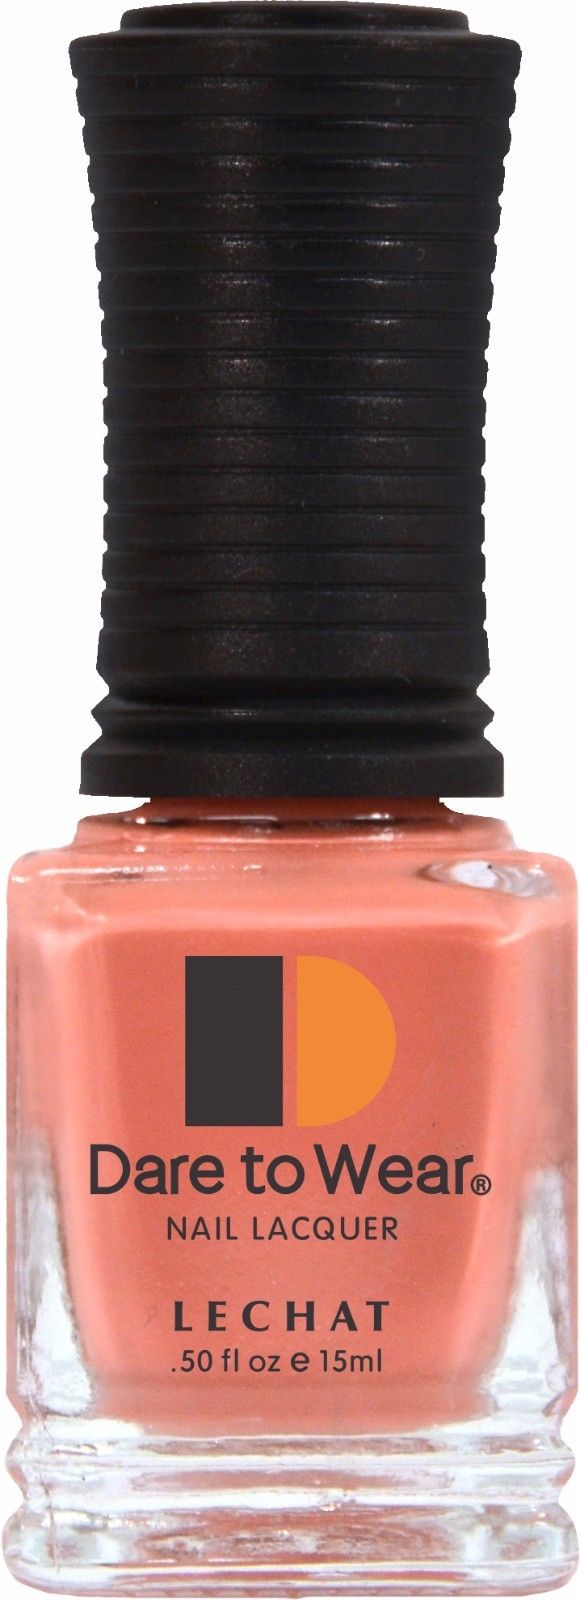 LECHAT Dare to Wear Nail Polish - 169 to 198 (Choose Your Favorite colors)